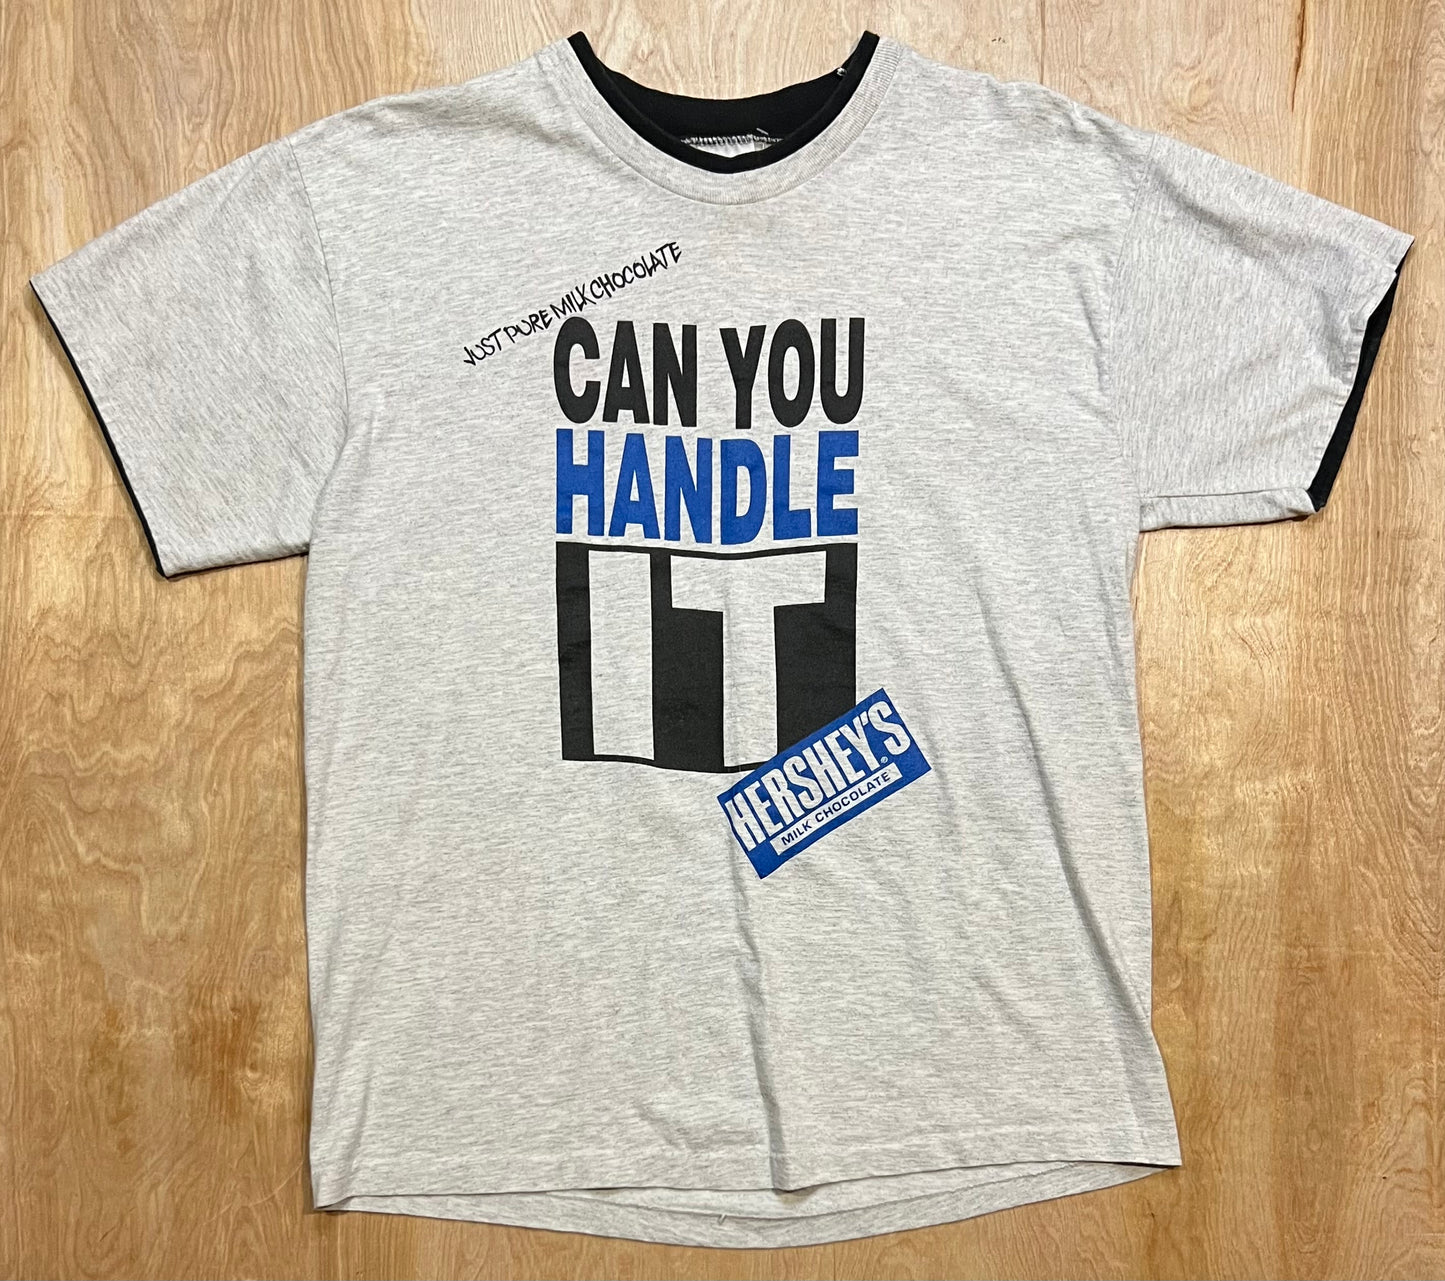 Vintage Hershey's Chocolate "Can You Handle It?" Double Stitched T-Shirt